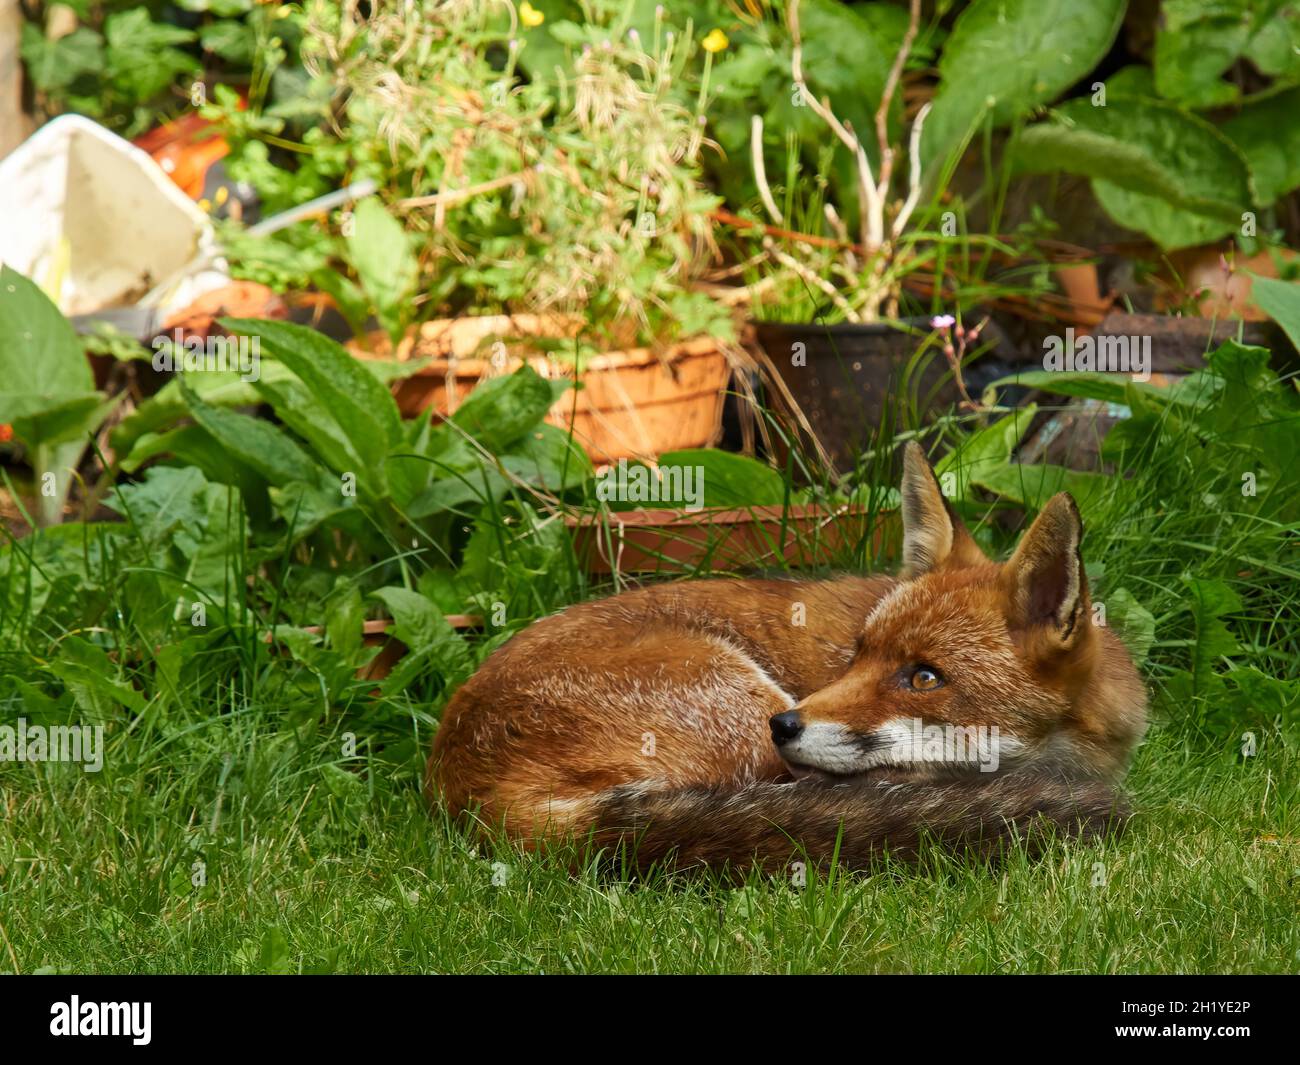 A fox visits a residential garden in London’s suburbs, startled awake from its shaded rest by a nearby noise. Stock Photo